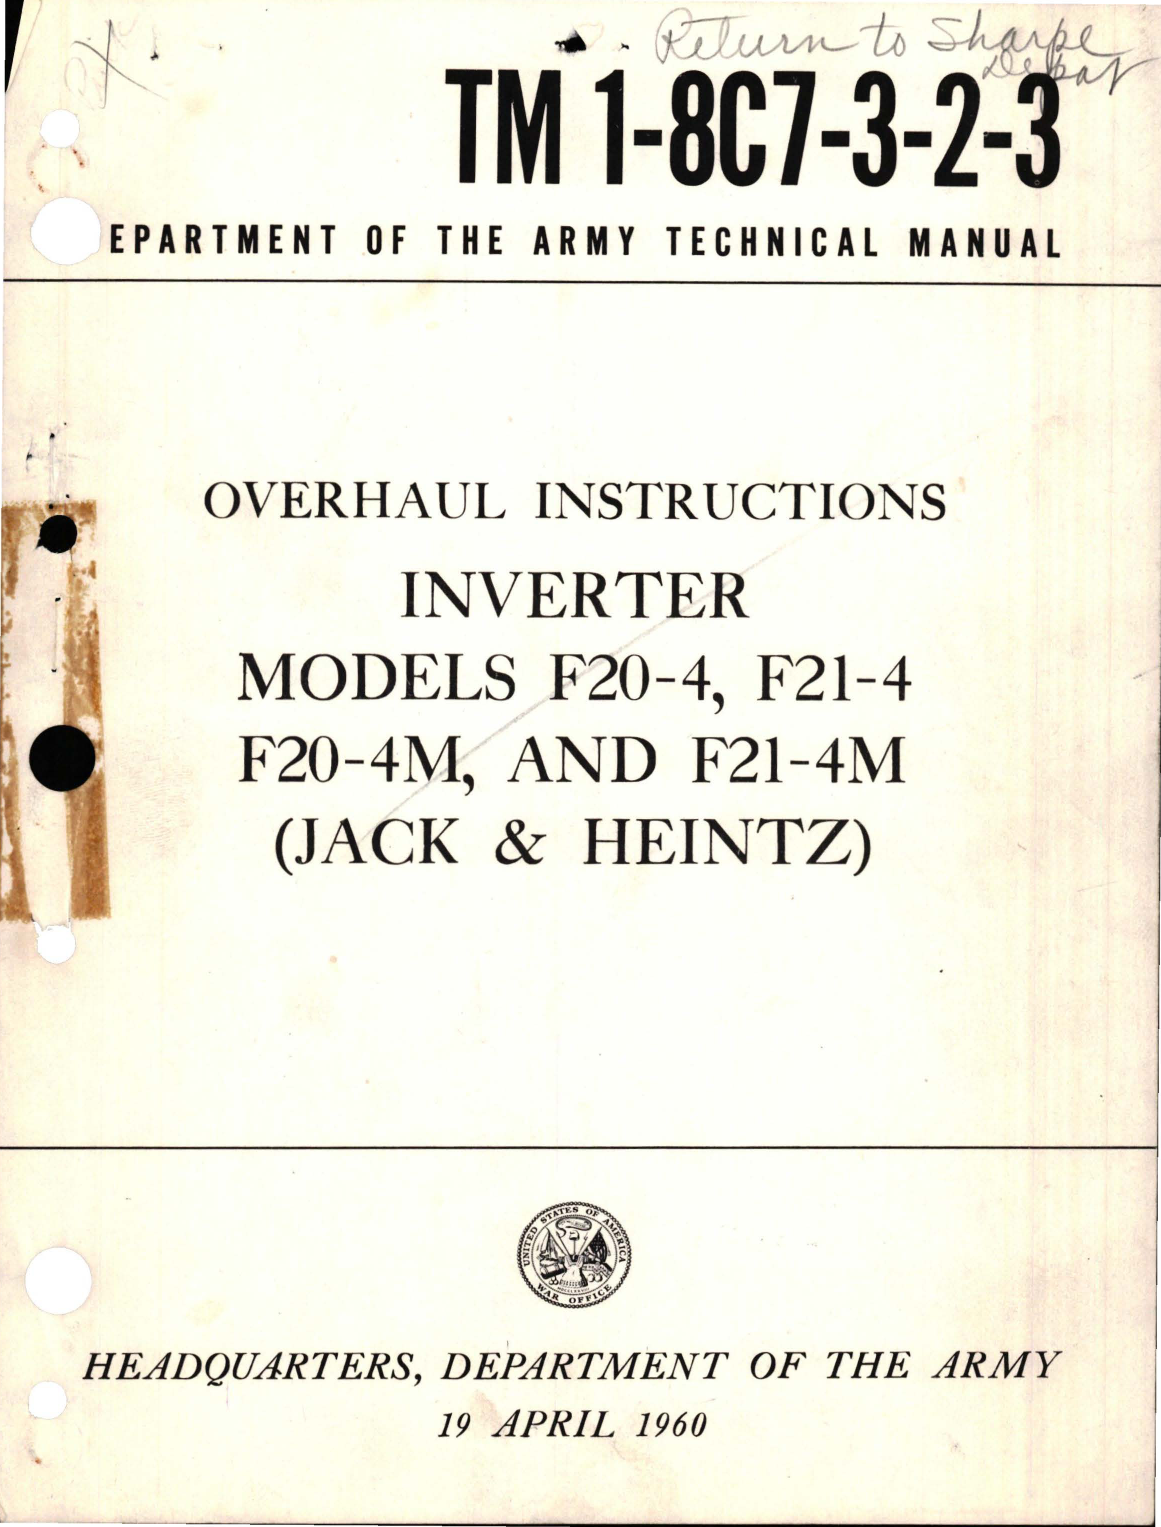 Sample page 1 from AirCorps Library document: Overhaul Instructions for Inverter - Models F20-4, F21-4, F20-4M, and F21-4M